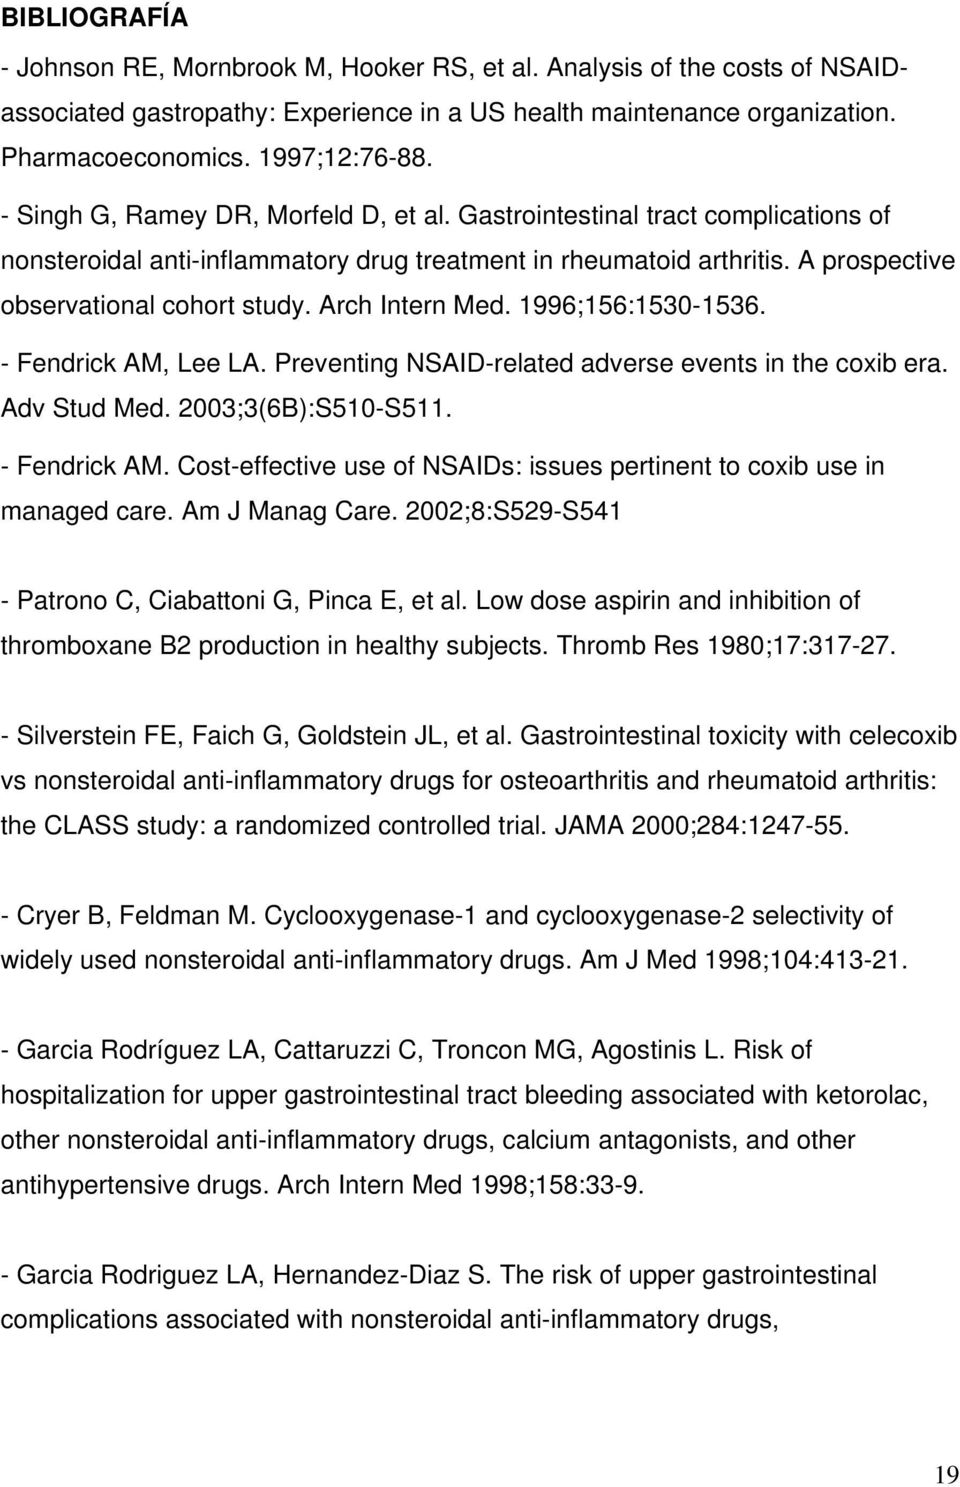 Arch Intern Med. 1996;156:1530-1536. - Fendrick AM, Lee LA. Preventing NSAID-related adverse events in the coxib era. Adv Stud Med. 2003;3(6B):S510-S511. - Fendrick AM. Cost-effective use of NSAIDs: issues pertinent to coxib use in managed care.